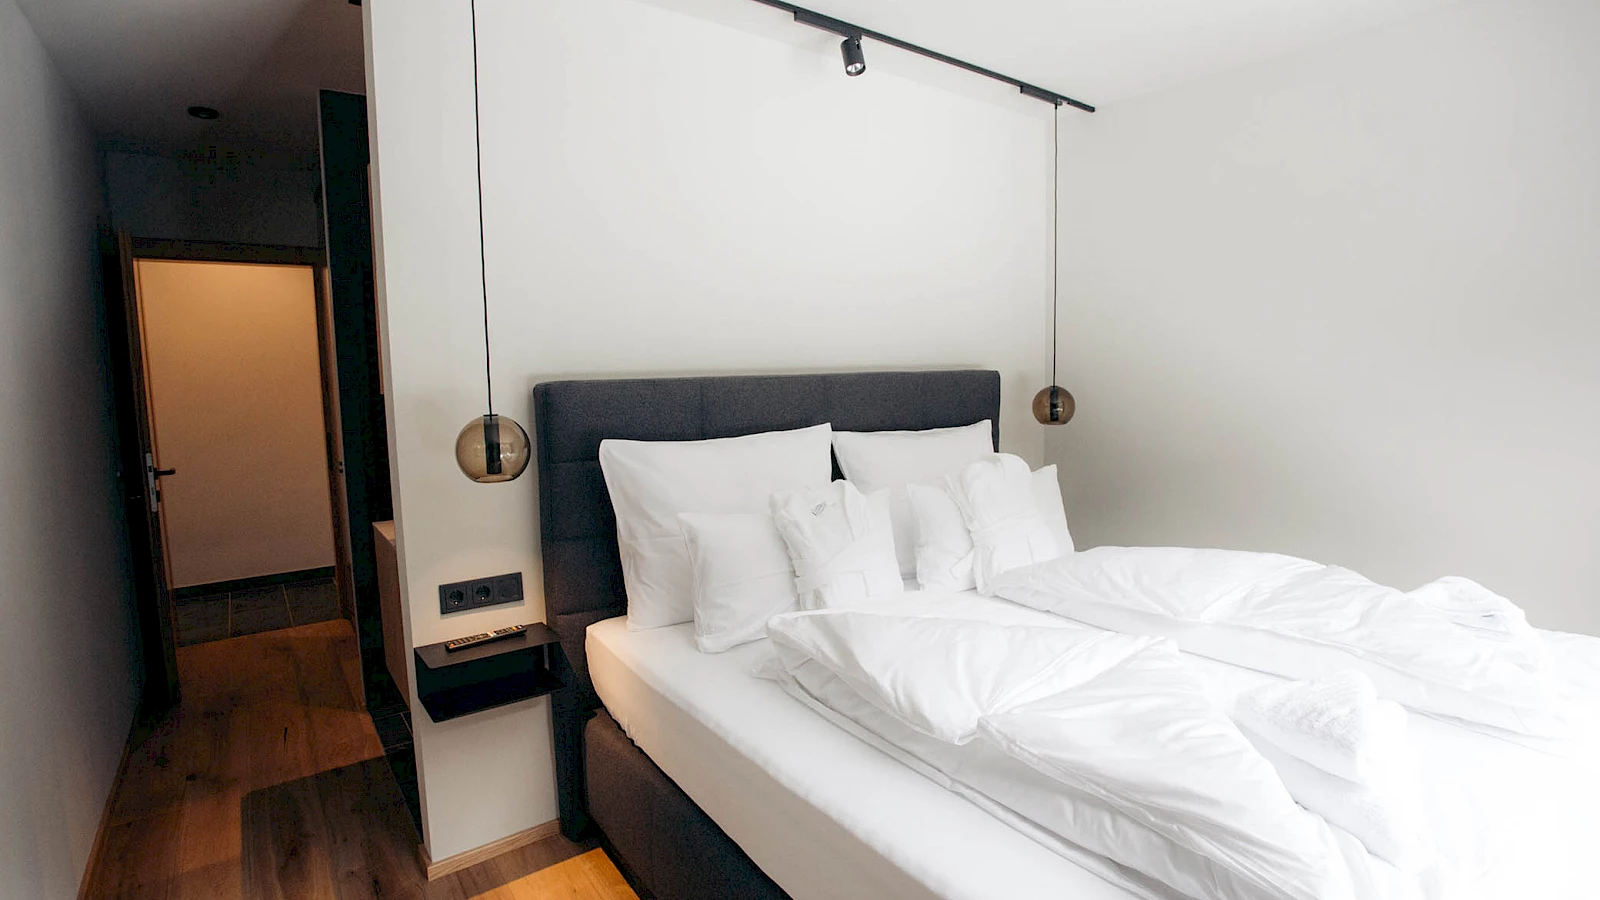 The beds at Adler Chalet Ischgl offer incredible comfort. The reviews on Booking.com are outstanding.